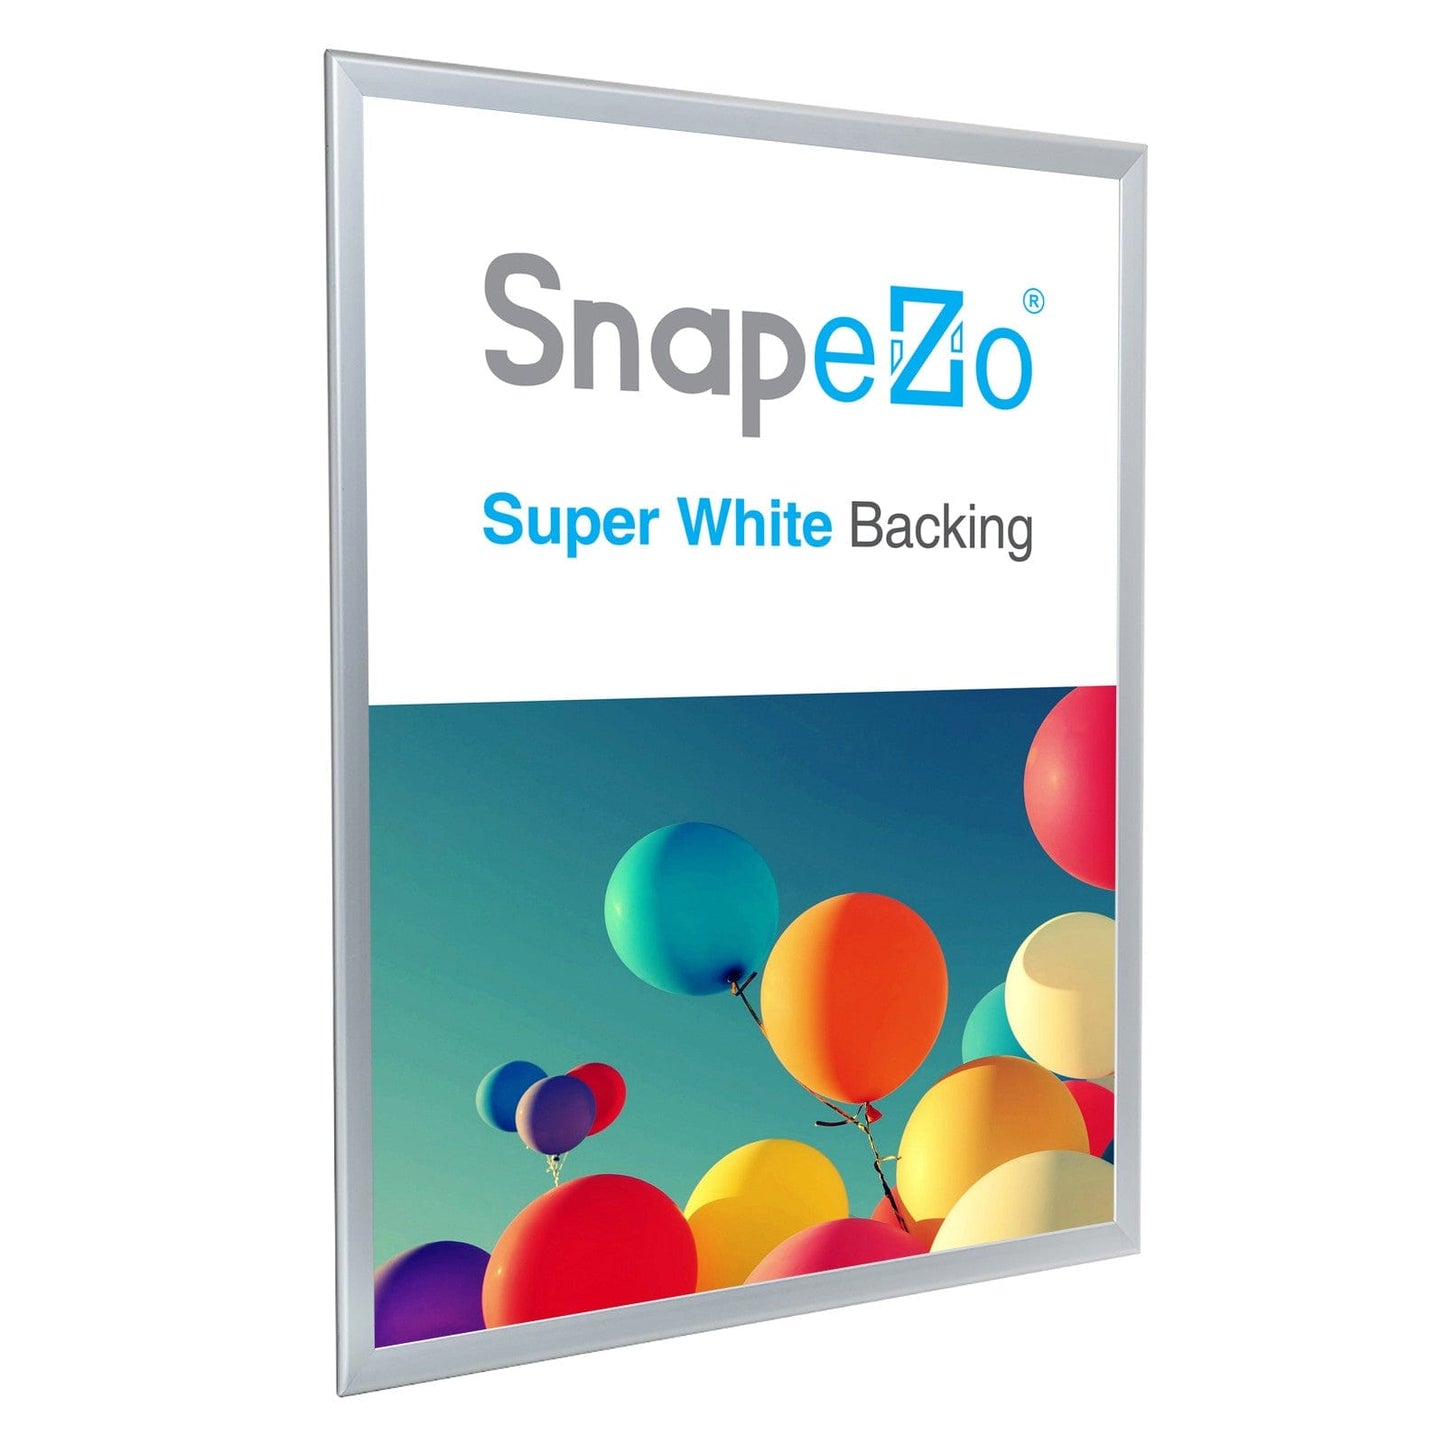 27x39 Silver SnapeZo® Poster Snap Frame 1.25" - Snap Frames Direct